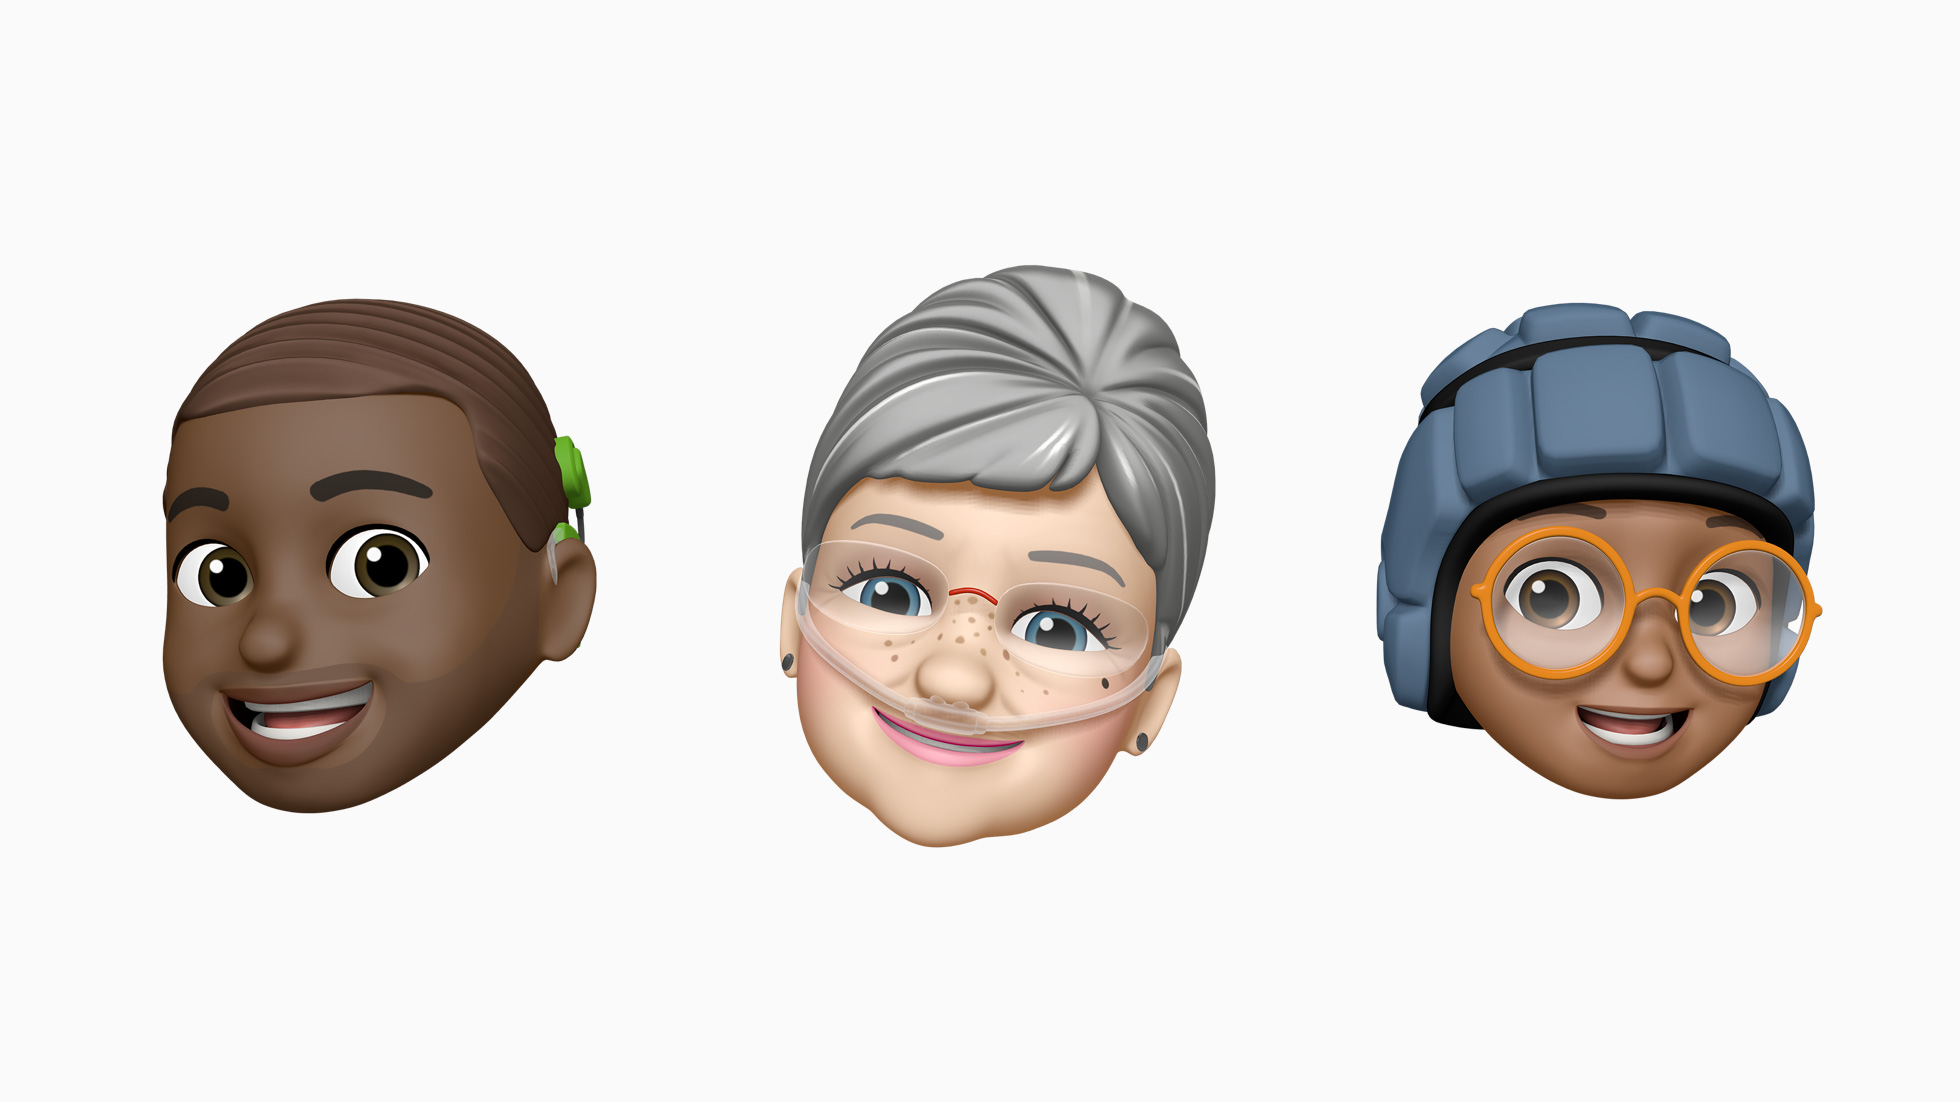 Images of Apple Memoji with a cochlear implant, an oxygen tube, and a soft helmet.